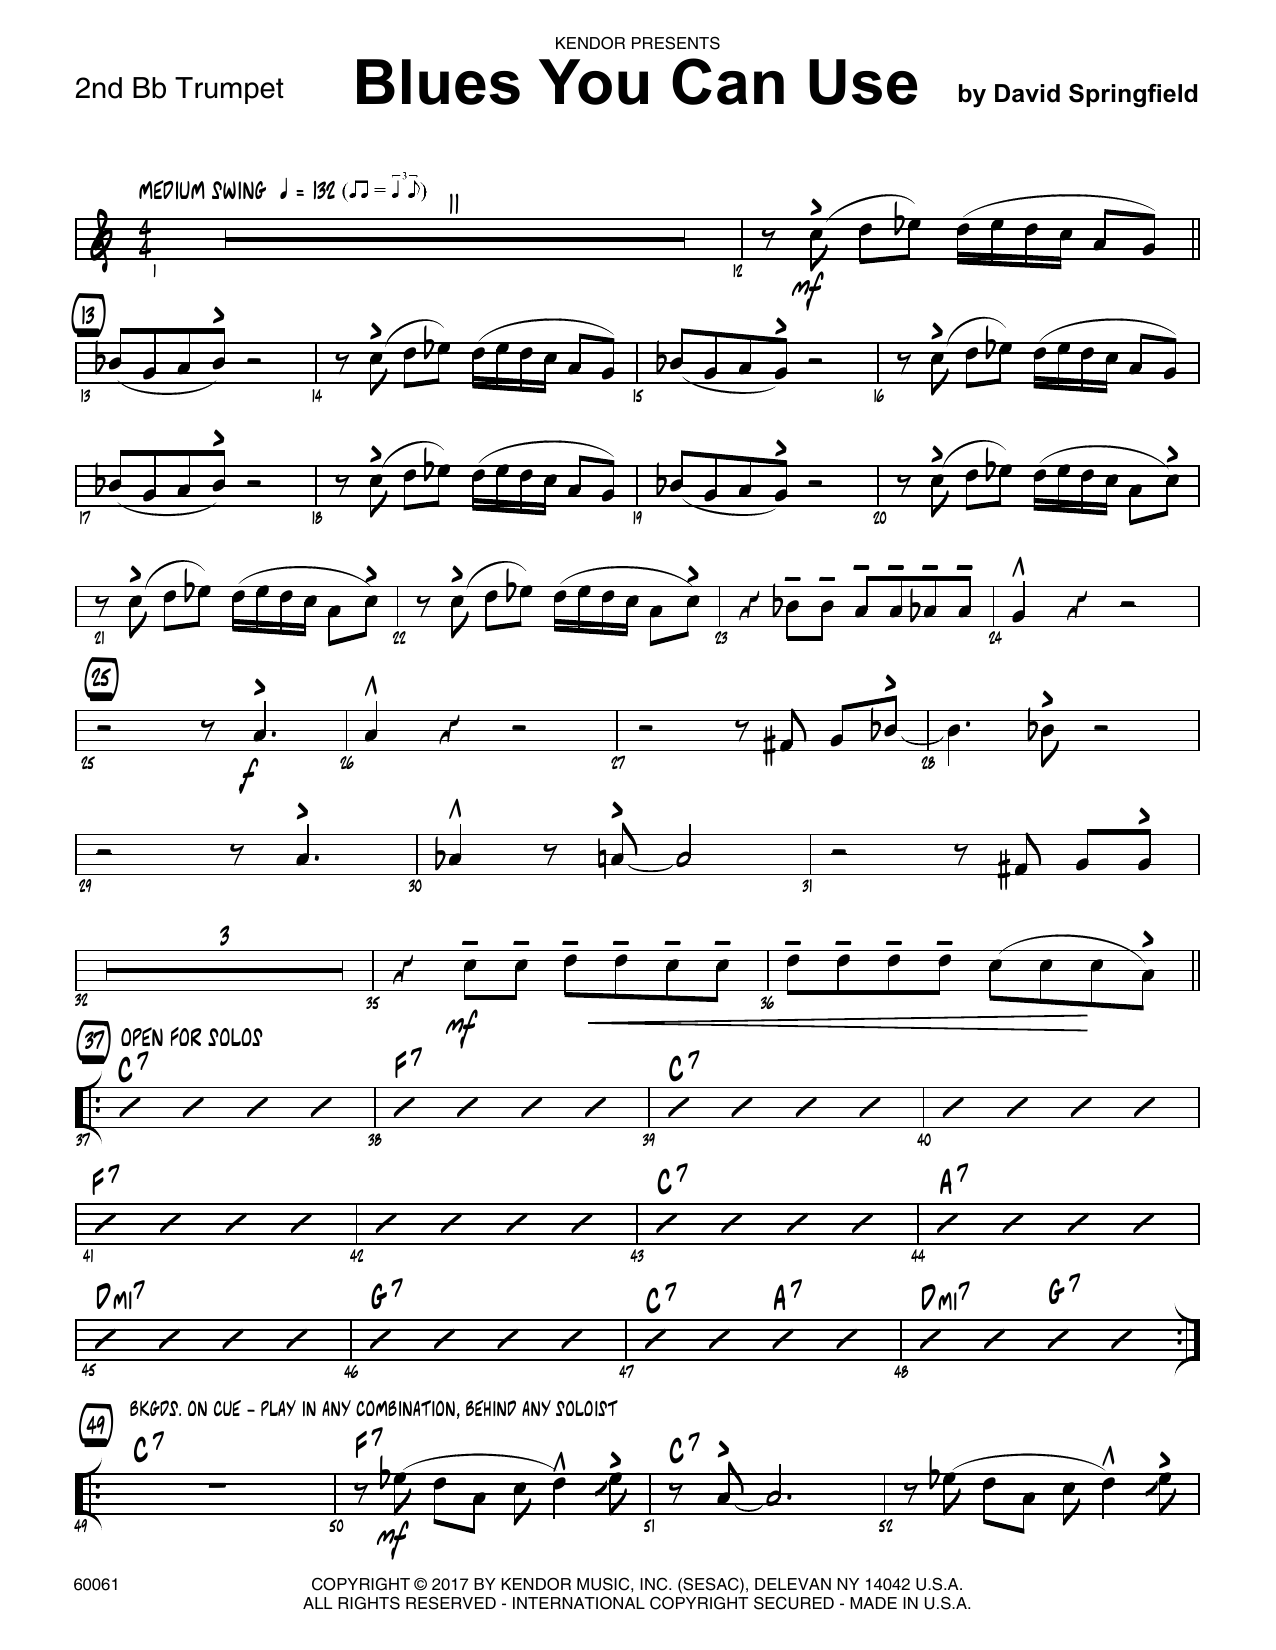 Download David Springfield Blues You Can Use - 2nd Bb Trumpet Sheet Music